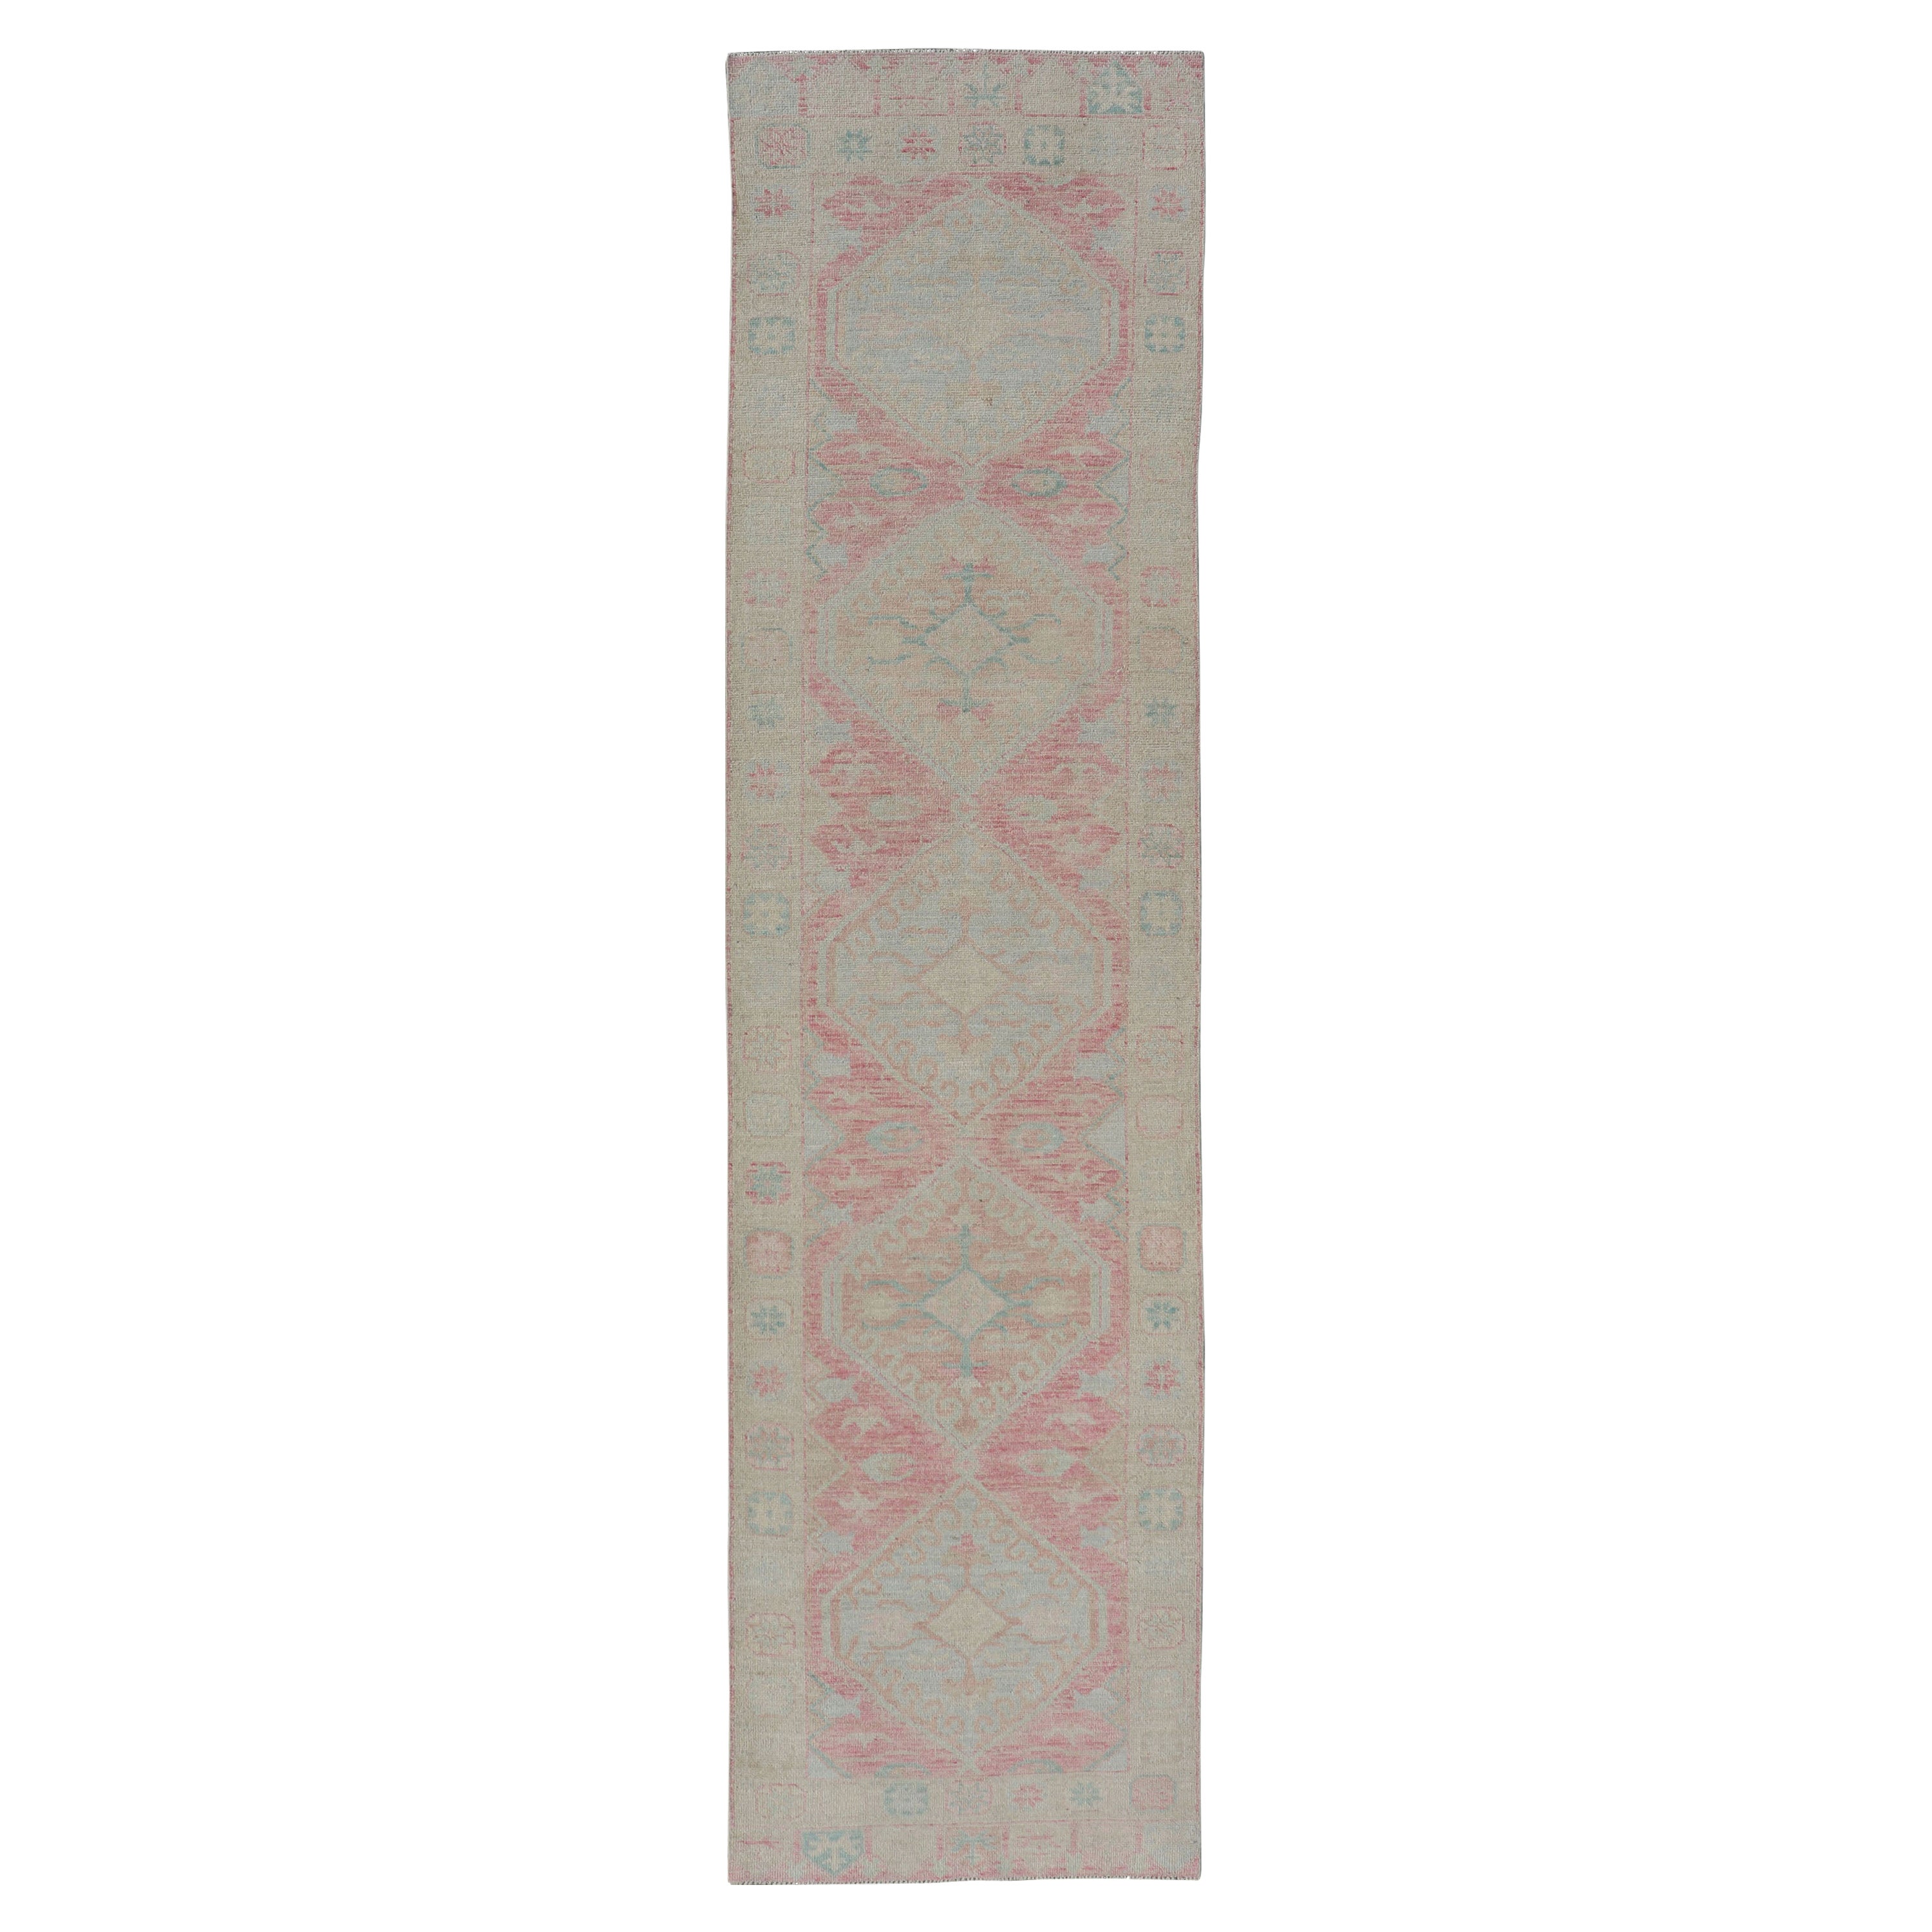 Modern Hand Knotted Oushak Runner With Medallions in Pink's and Creams